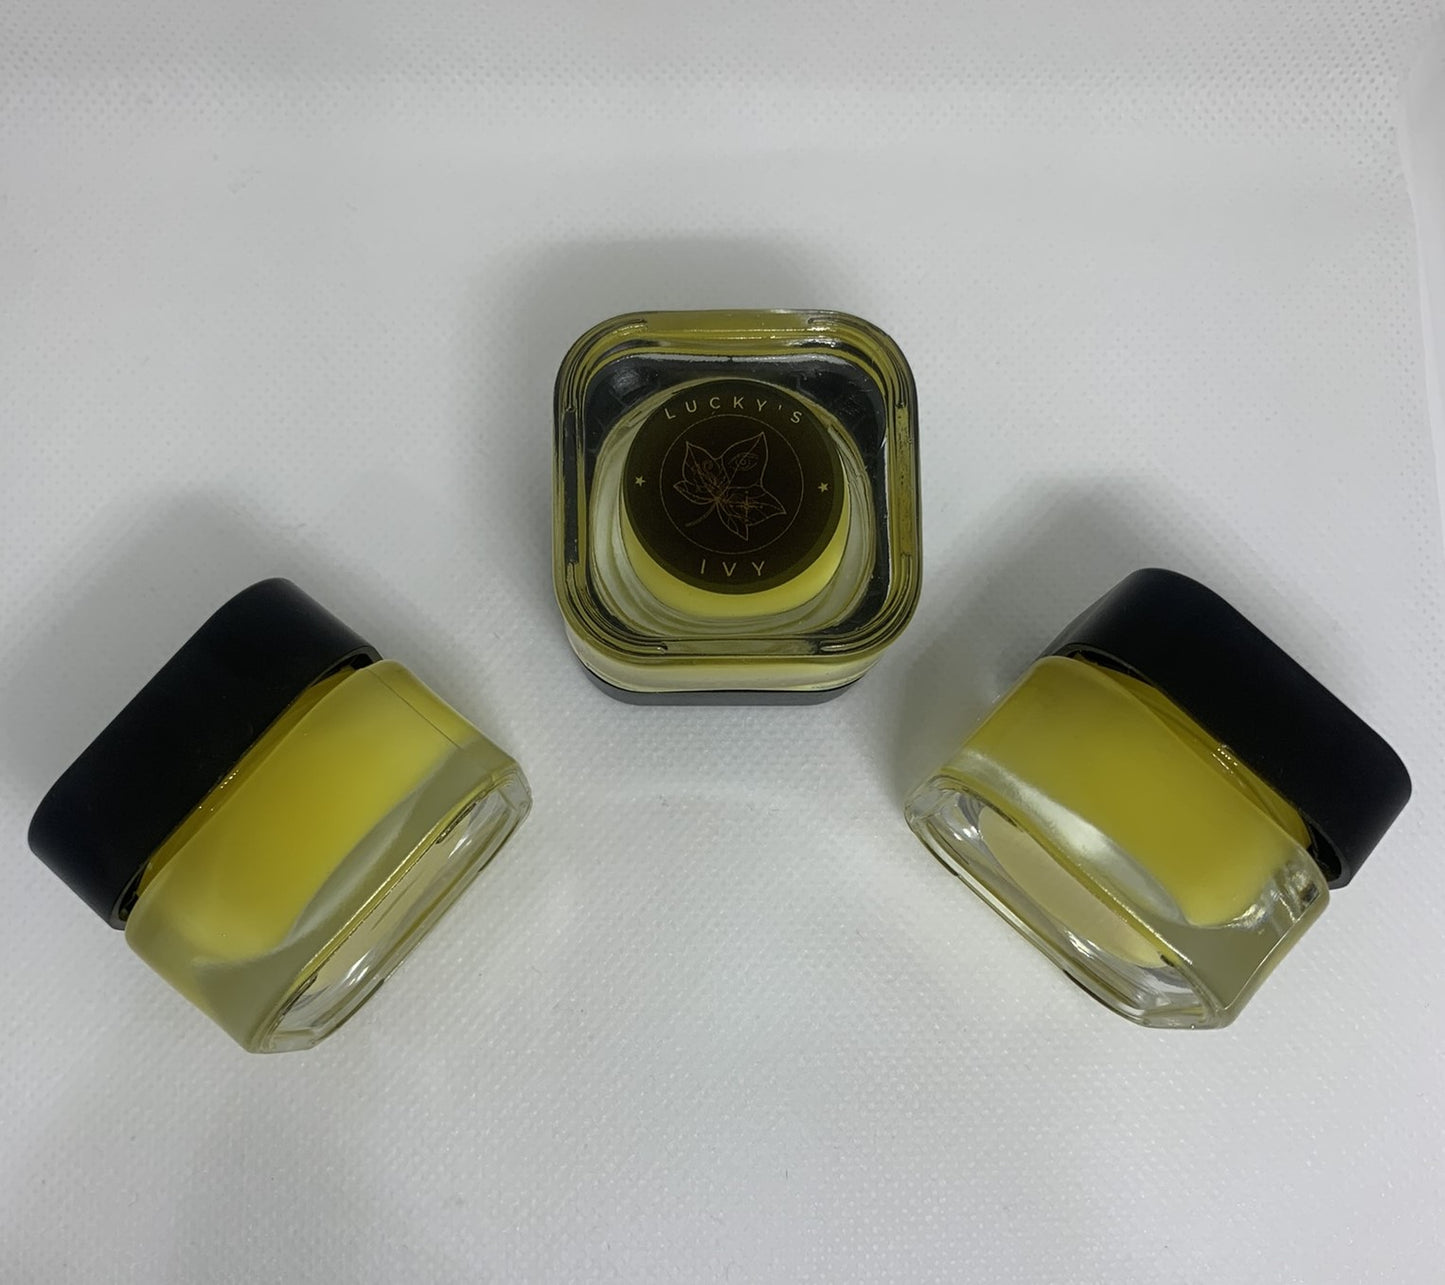 Image of Lucky's Ivy Golden Night Under-Eye Balm. Closed jars showing the outside of the product, one product having the logo visible.